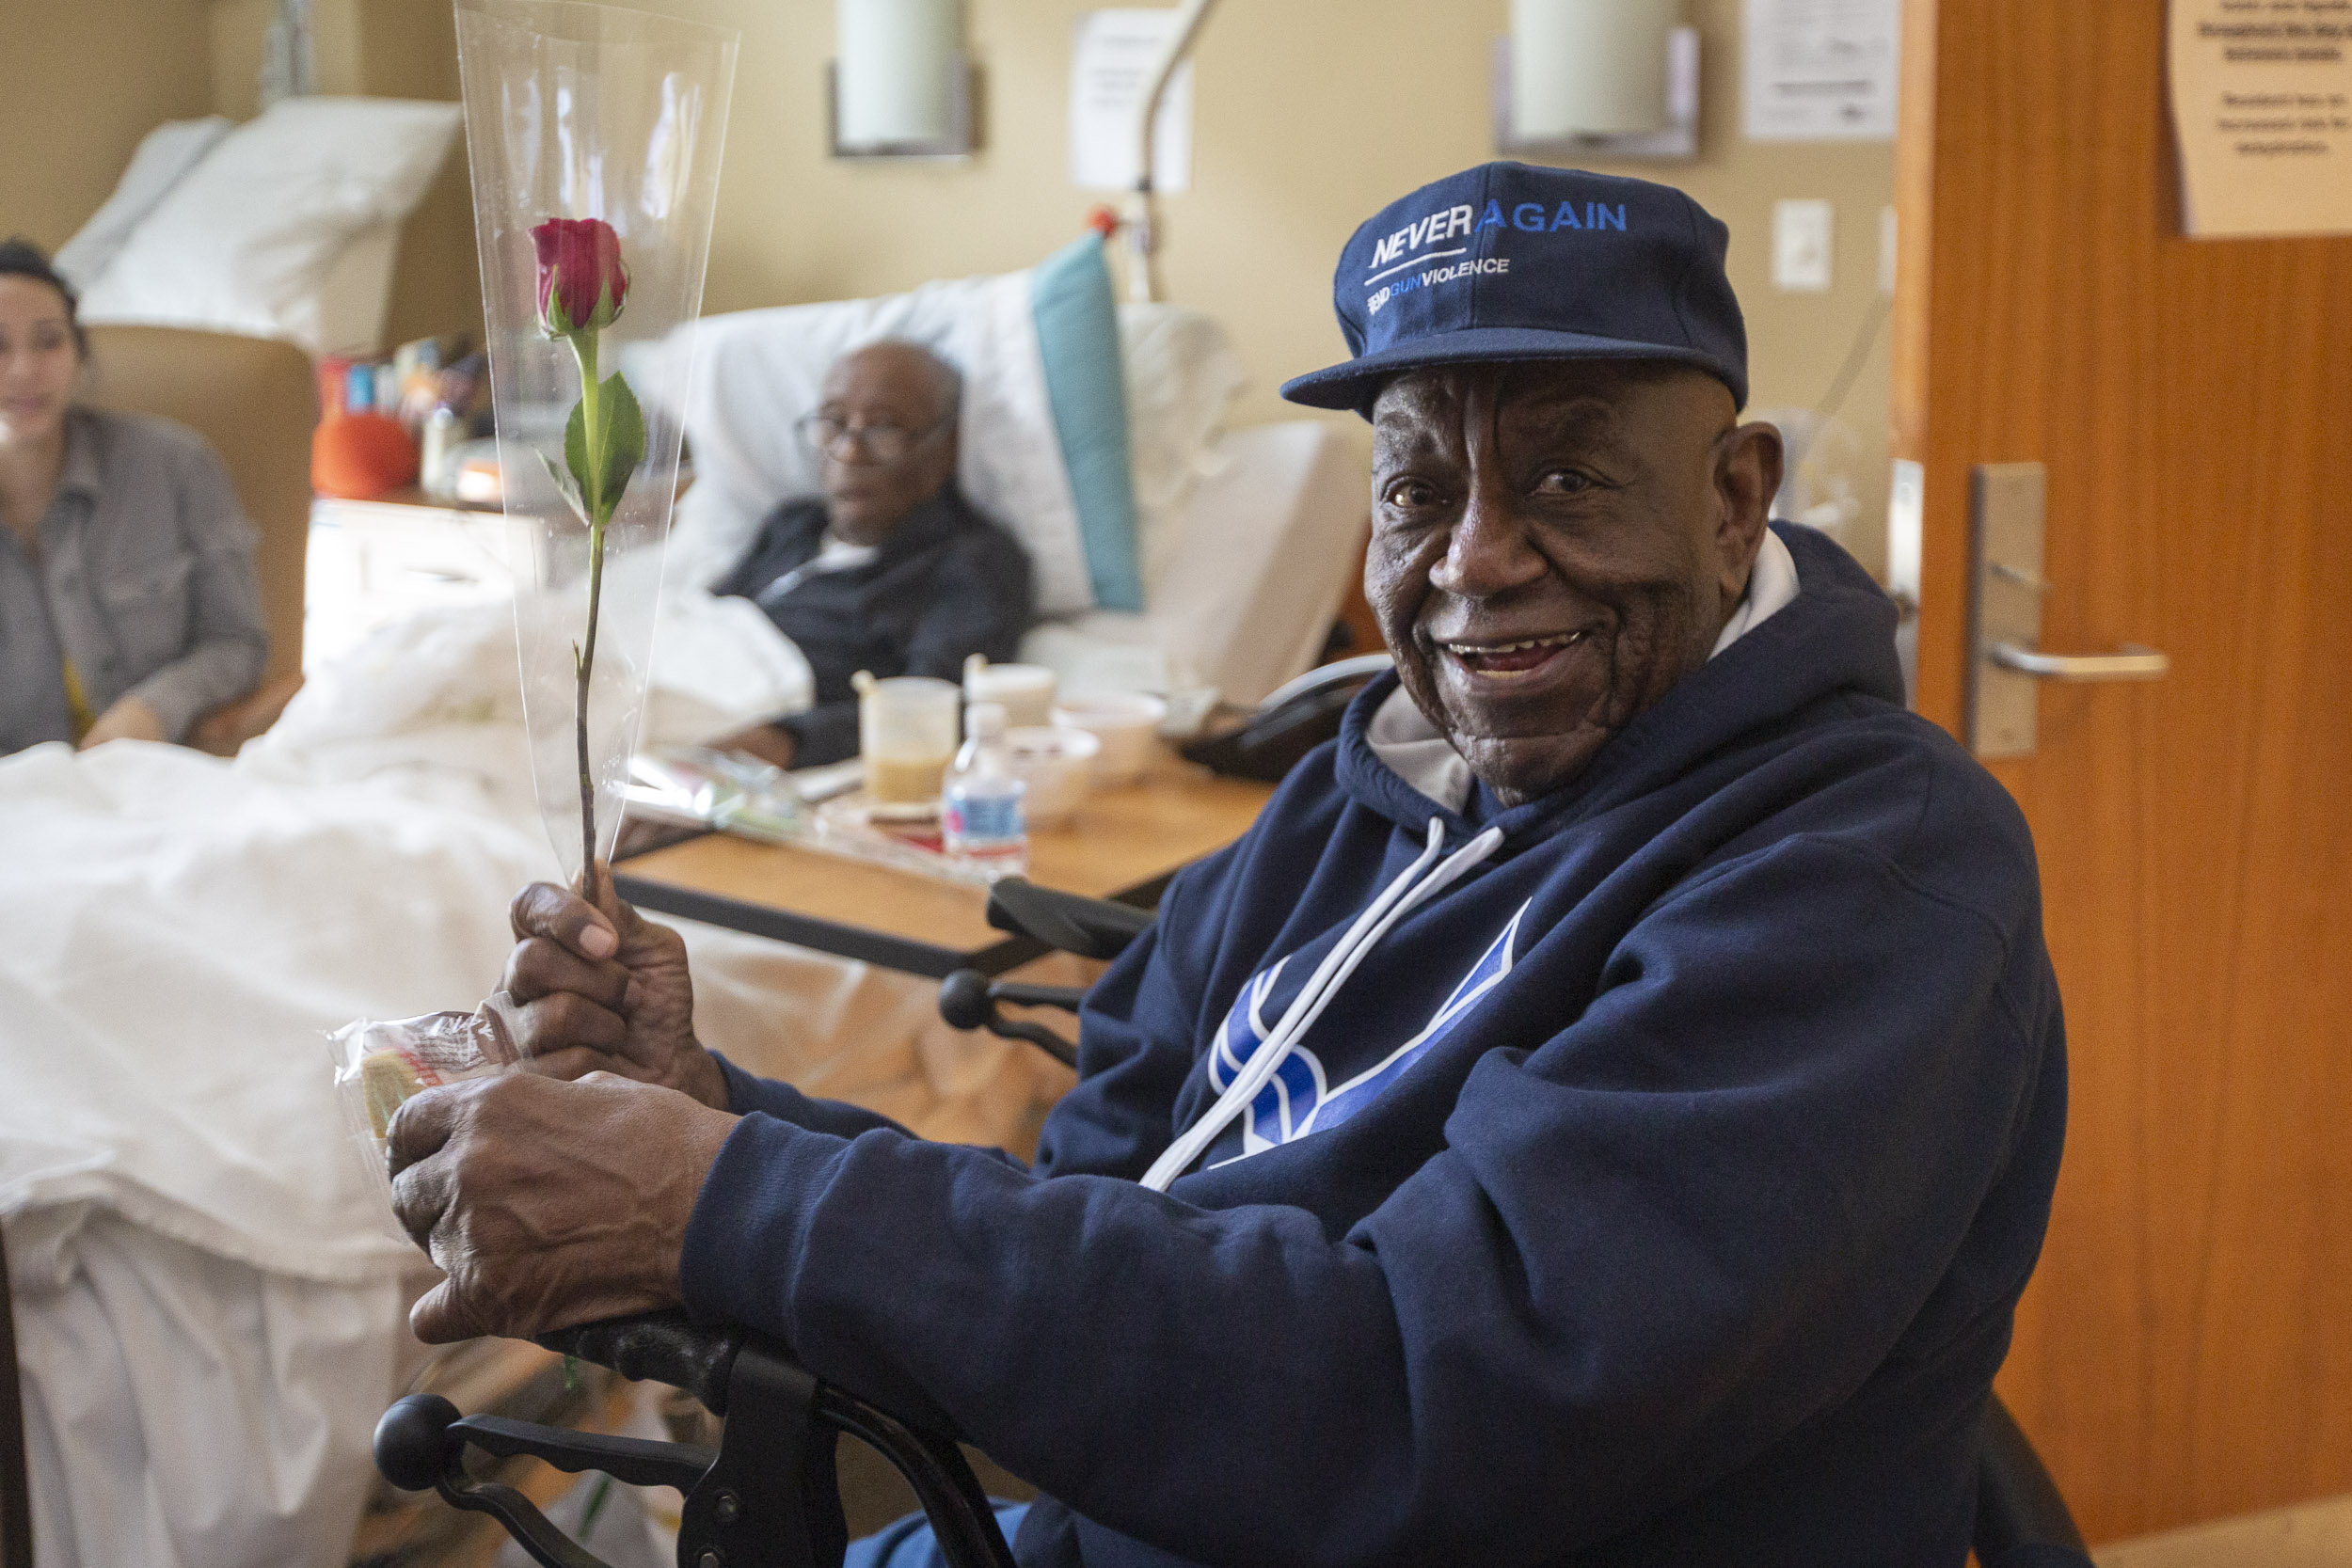  A military veteran receives a rose from 1-800-Flowers.com and a cookie from Cheryl's Cookies at the Armed Forces Retirement Home on Valentine’s Day on Thursday, Feb. 14, 2019 in Washington, DC. 